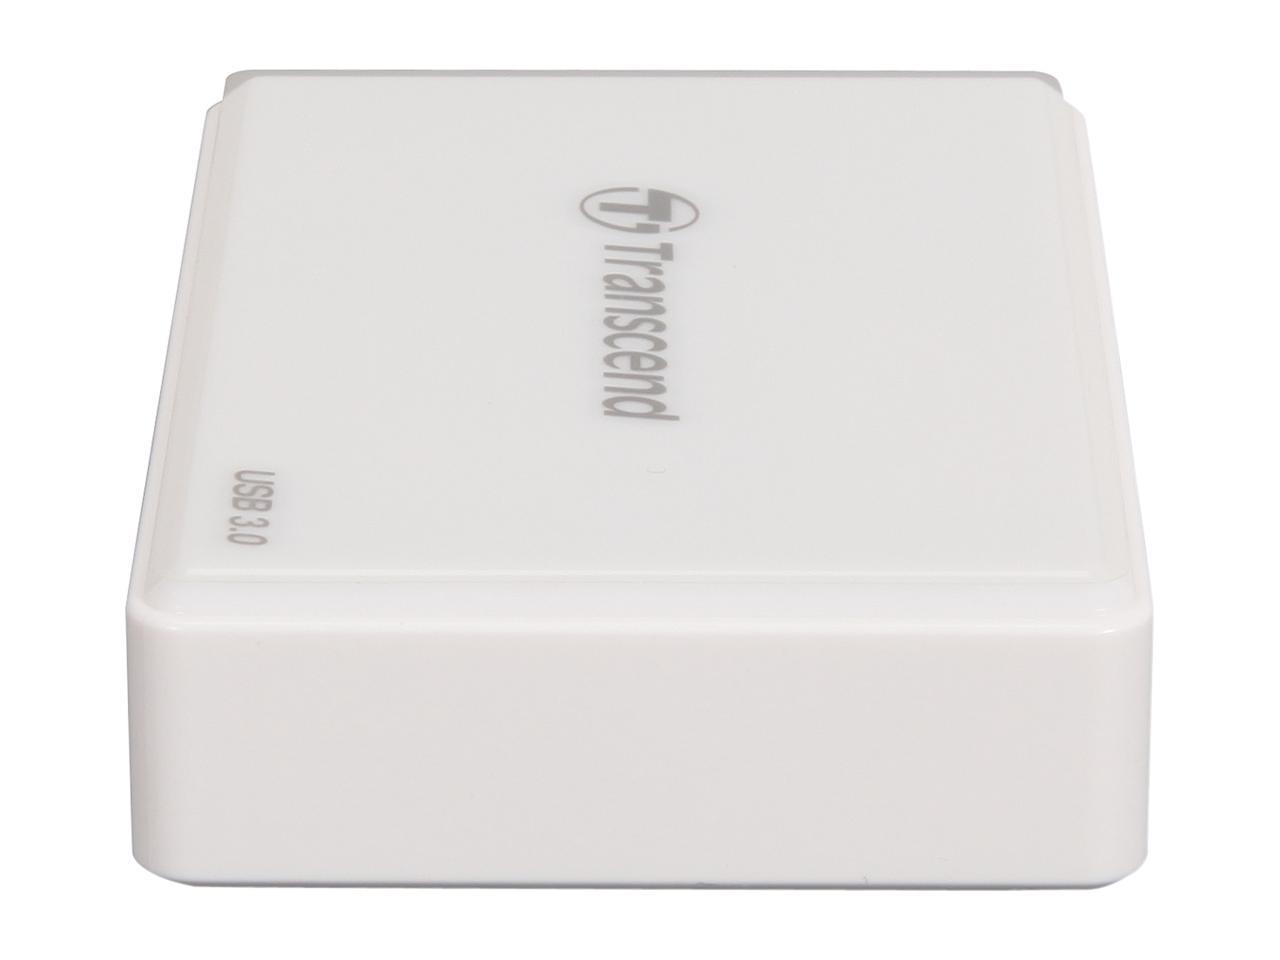 Transcend TS-RDF8K USB 3.0 Support SDHC/SDXC/UDMA6/UDMA7 CF and MSXC, with CF, SD, and Micro Slot Flash Card Reader - White